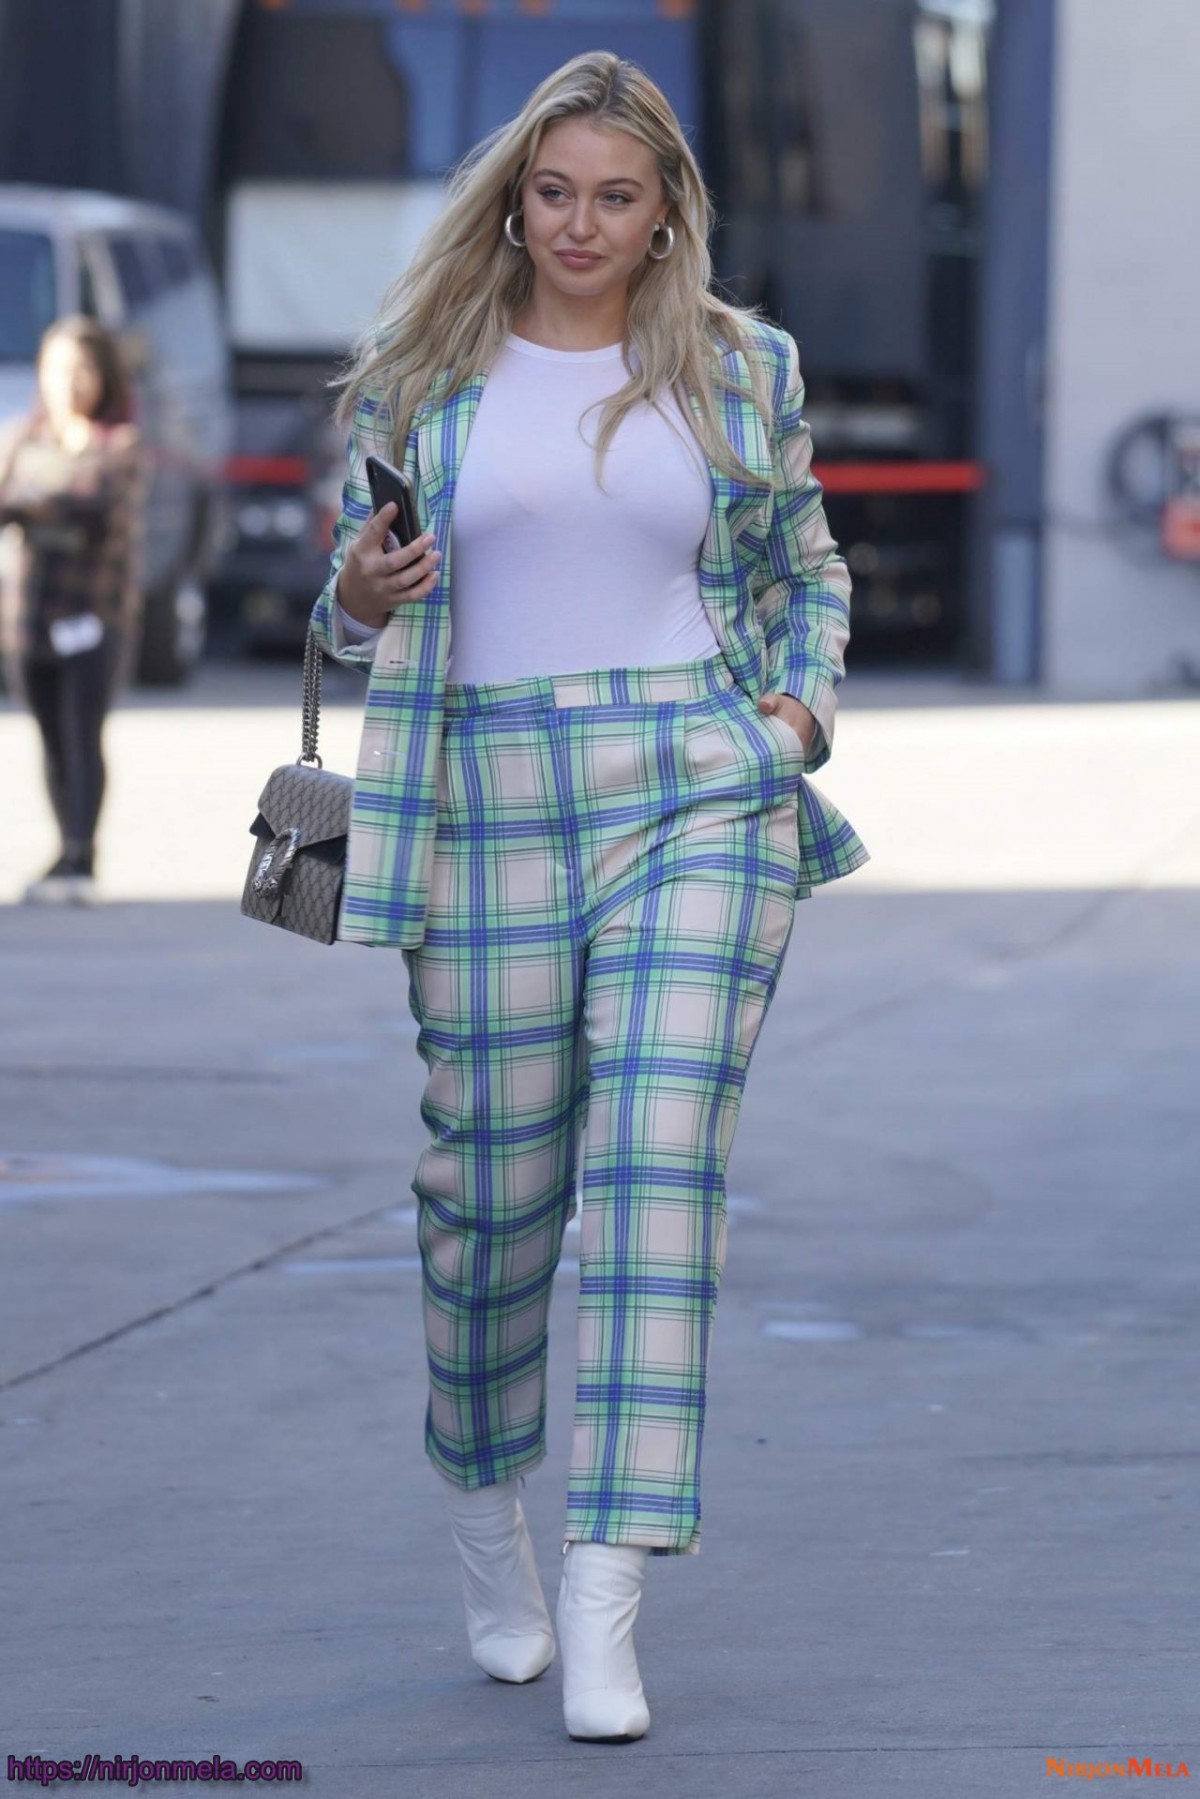 iskra-lawrence-style-and-fashion-01-04-2019-12.jpg